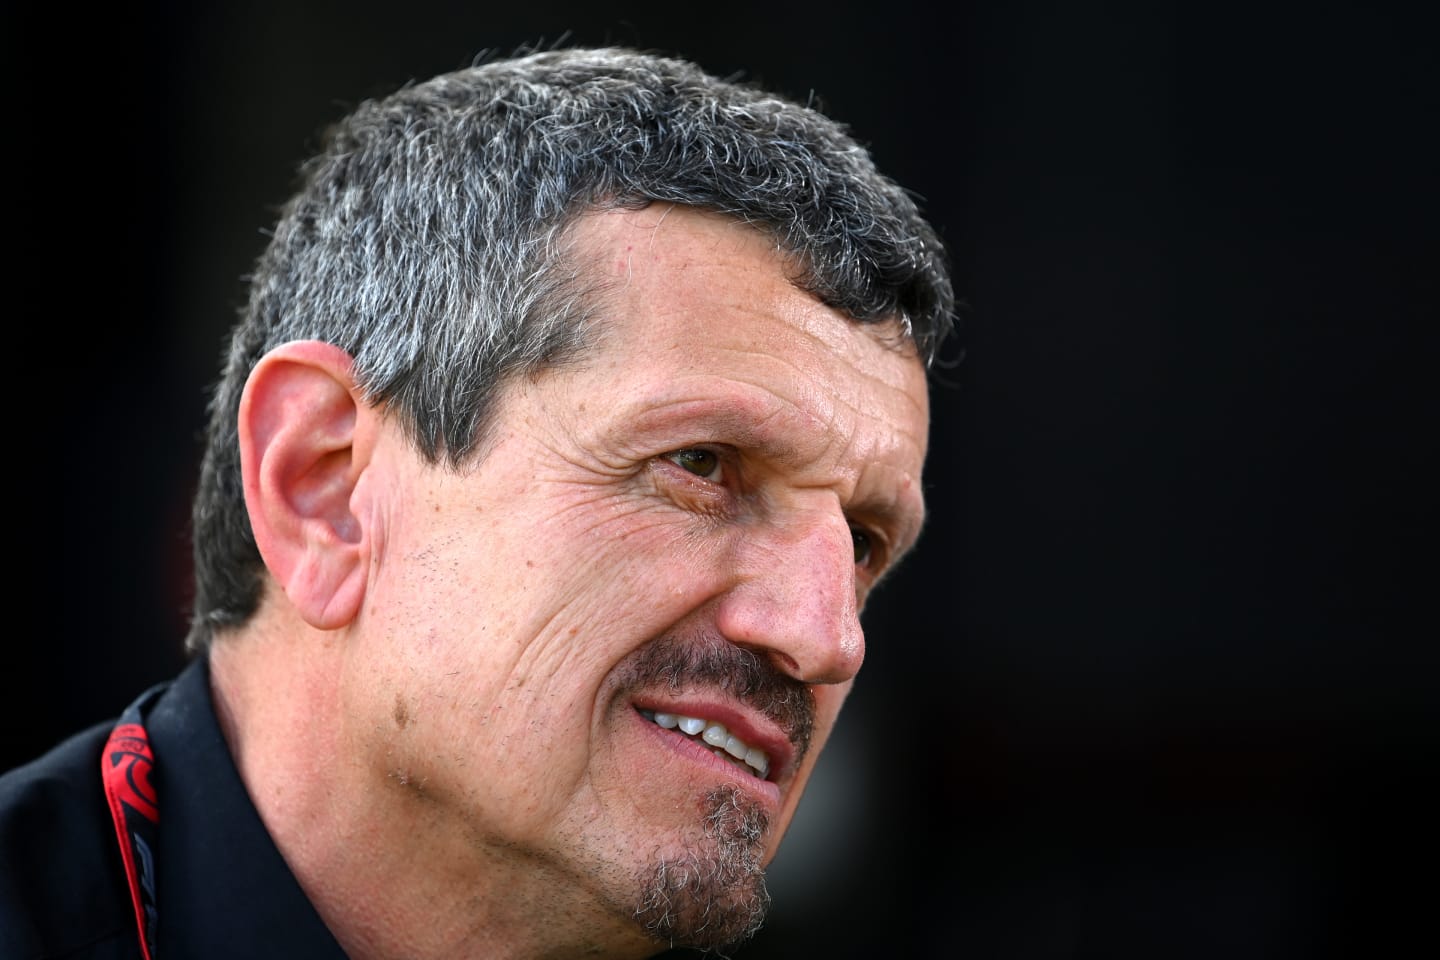 MELBOURNE, AUSTRALIA - MARCH 12: Haas F1 Team Principal Guenther Steiner looks on in the Paddock